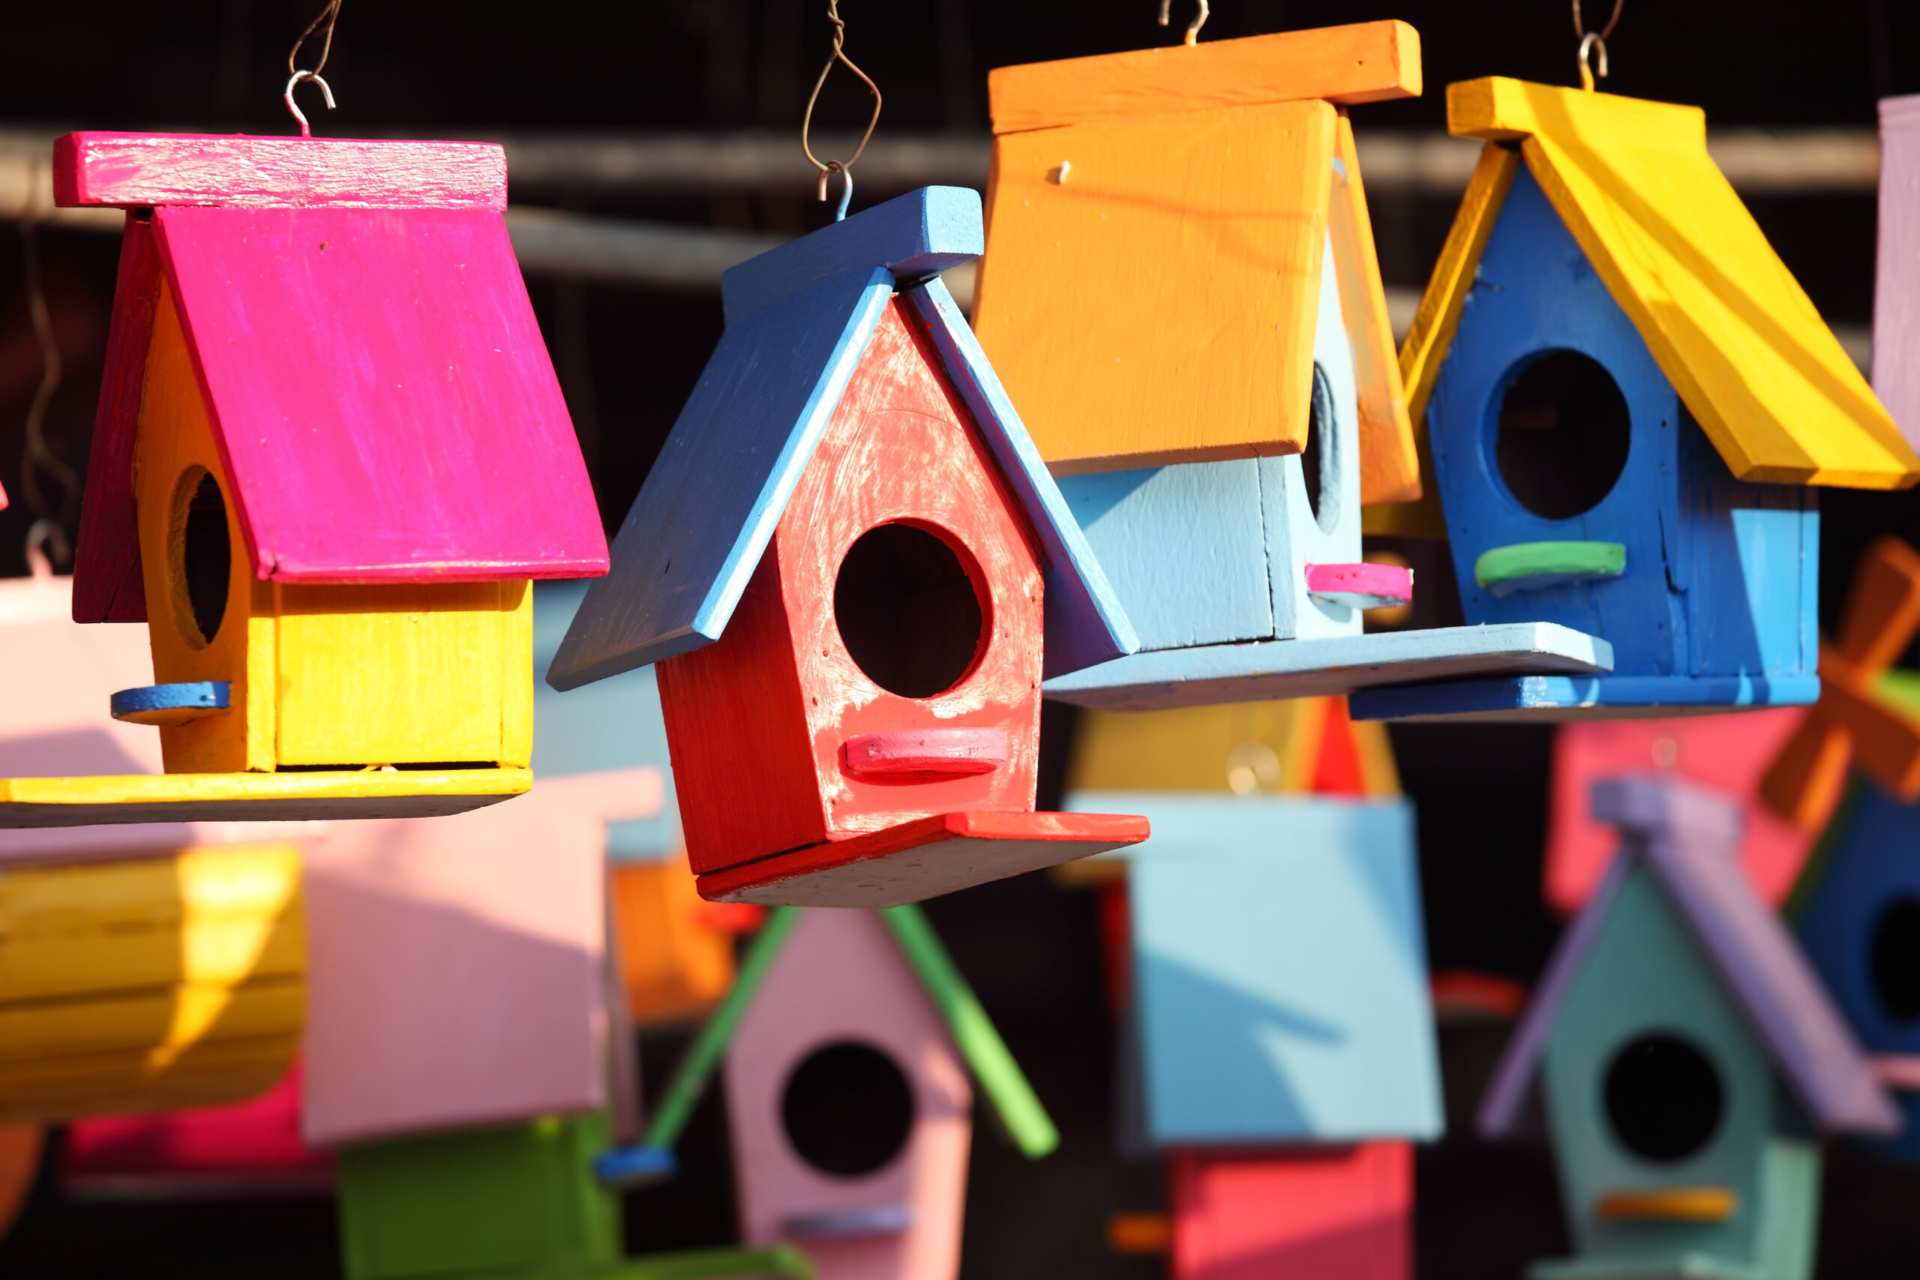 An assortment of colorful bird houses hanging from wires.